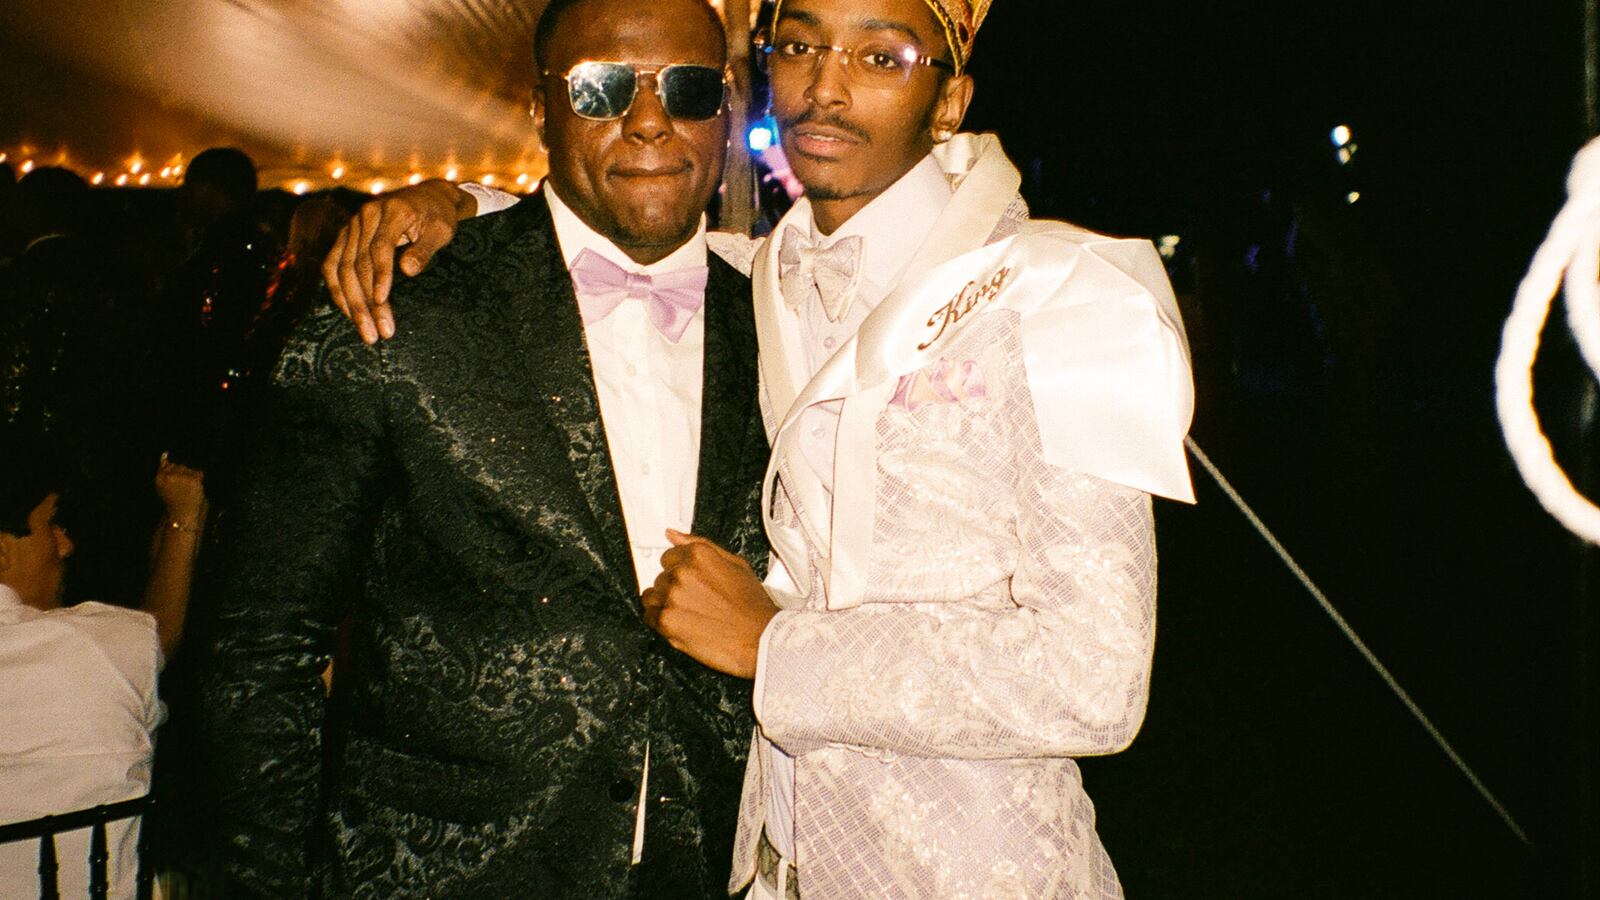 Two young men, one wearing a black tuxedo and another wearing a white tuxedo and gold crown, pose for a portrait together under a party tent at their prom.